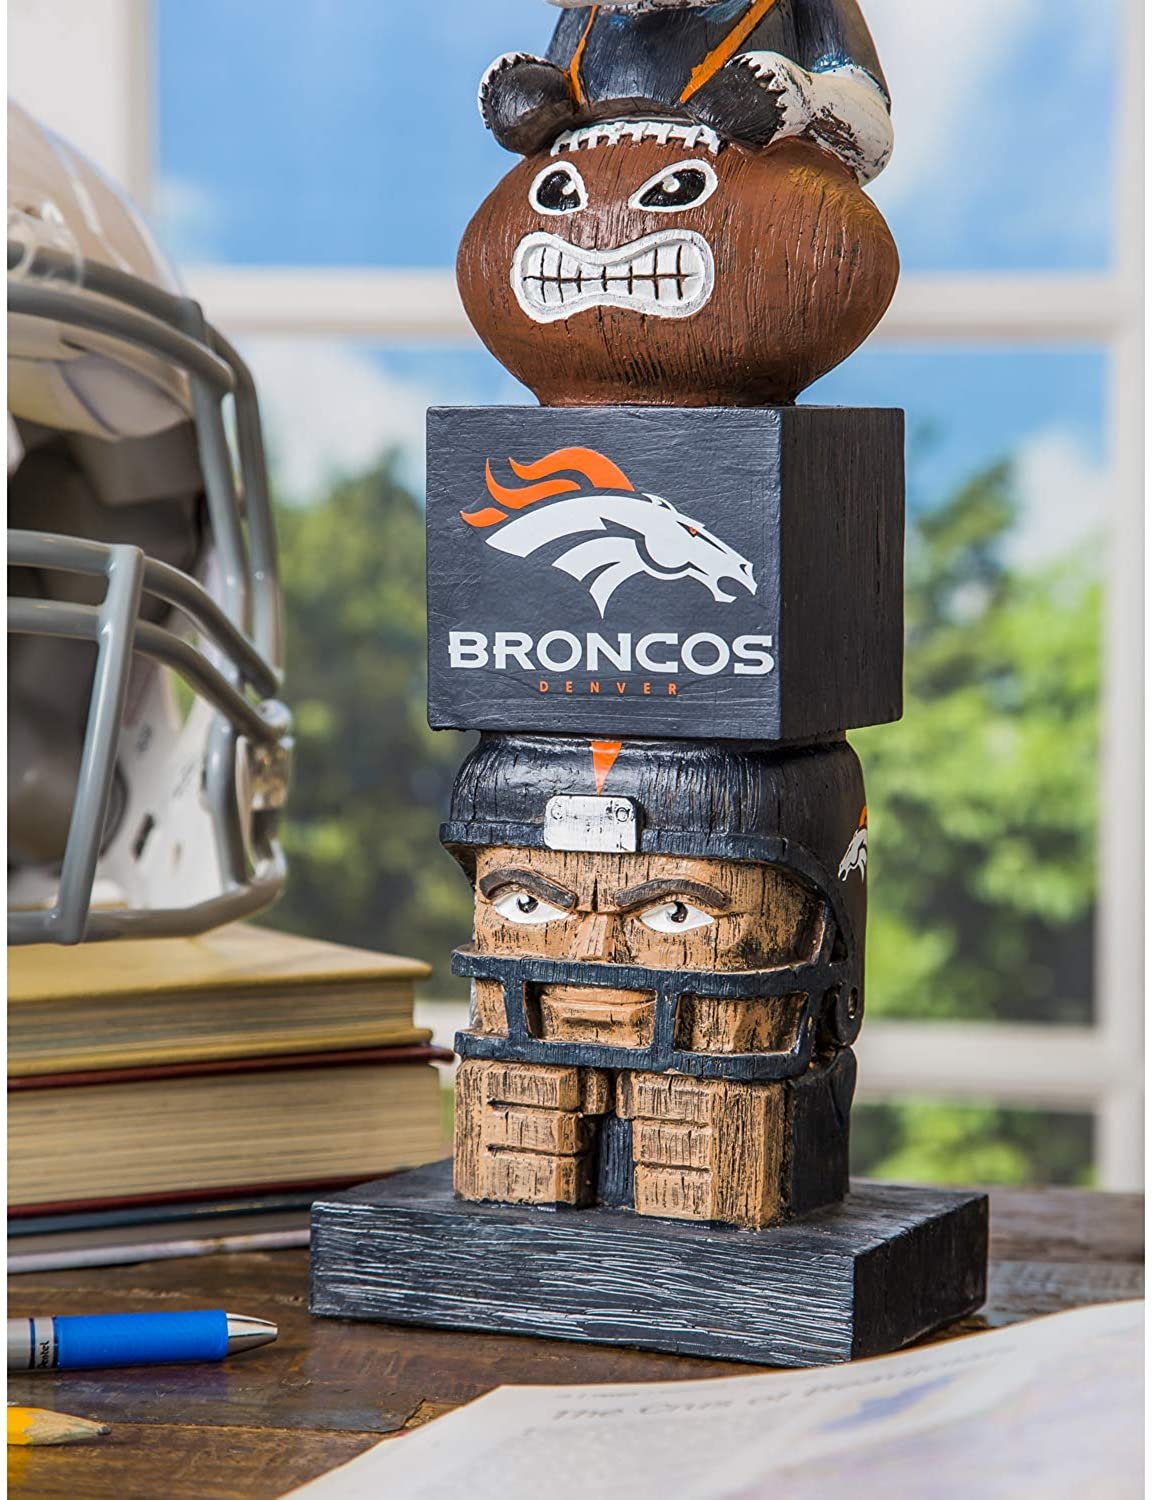 Denver Broncos Garden Statue, Tiki Totem Style, Outdoor or Indoor Use, 16 Inch Tall, Beautiful Hand Painted Resin Construction